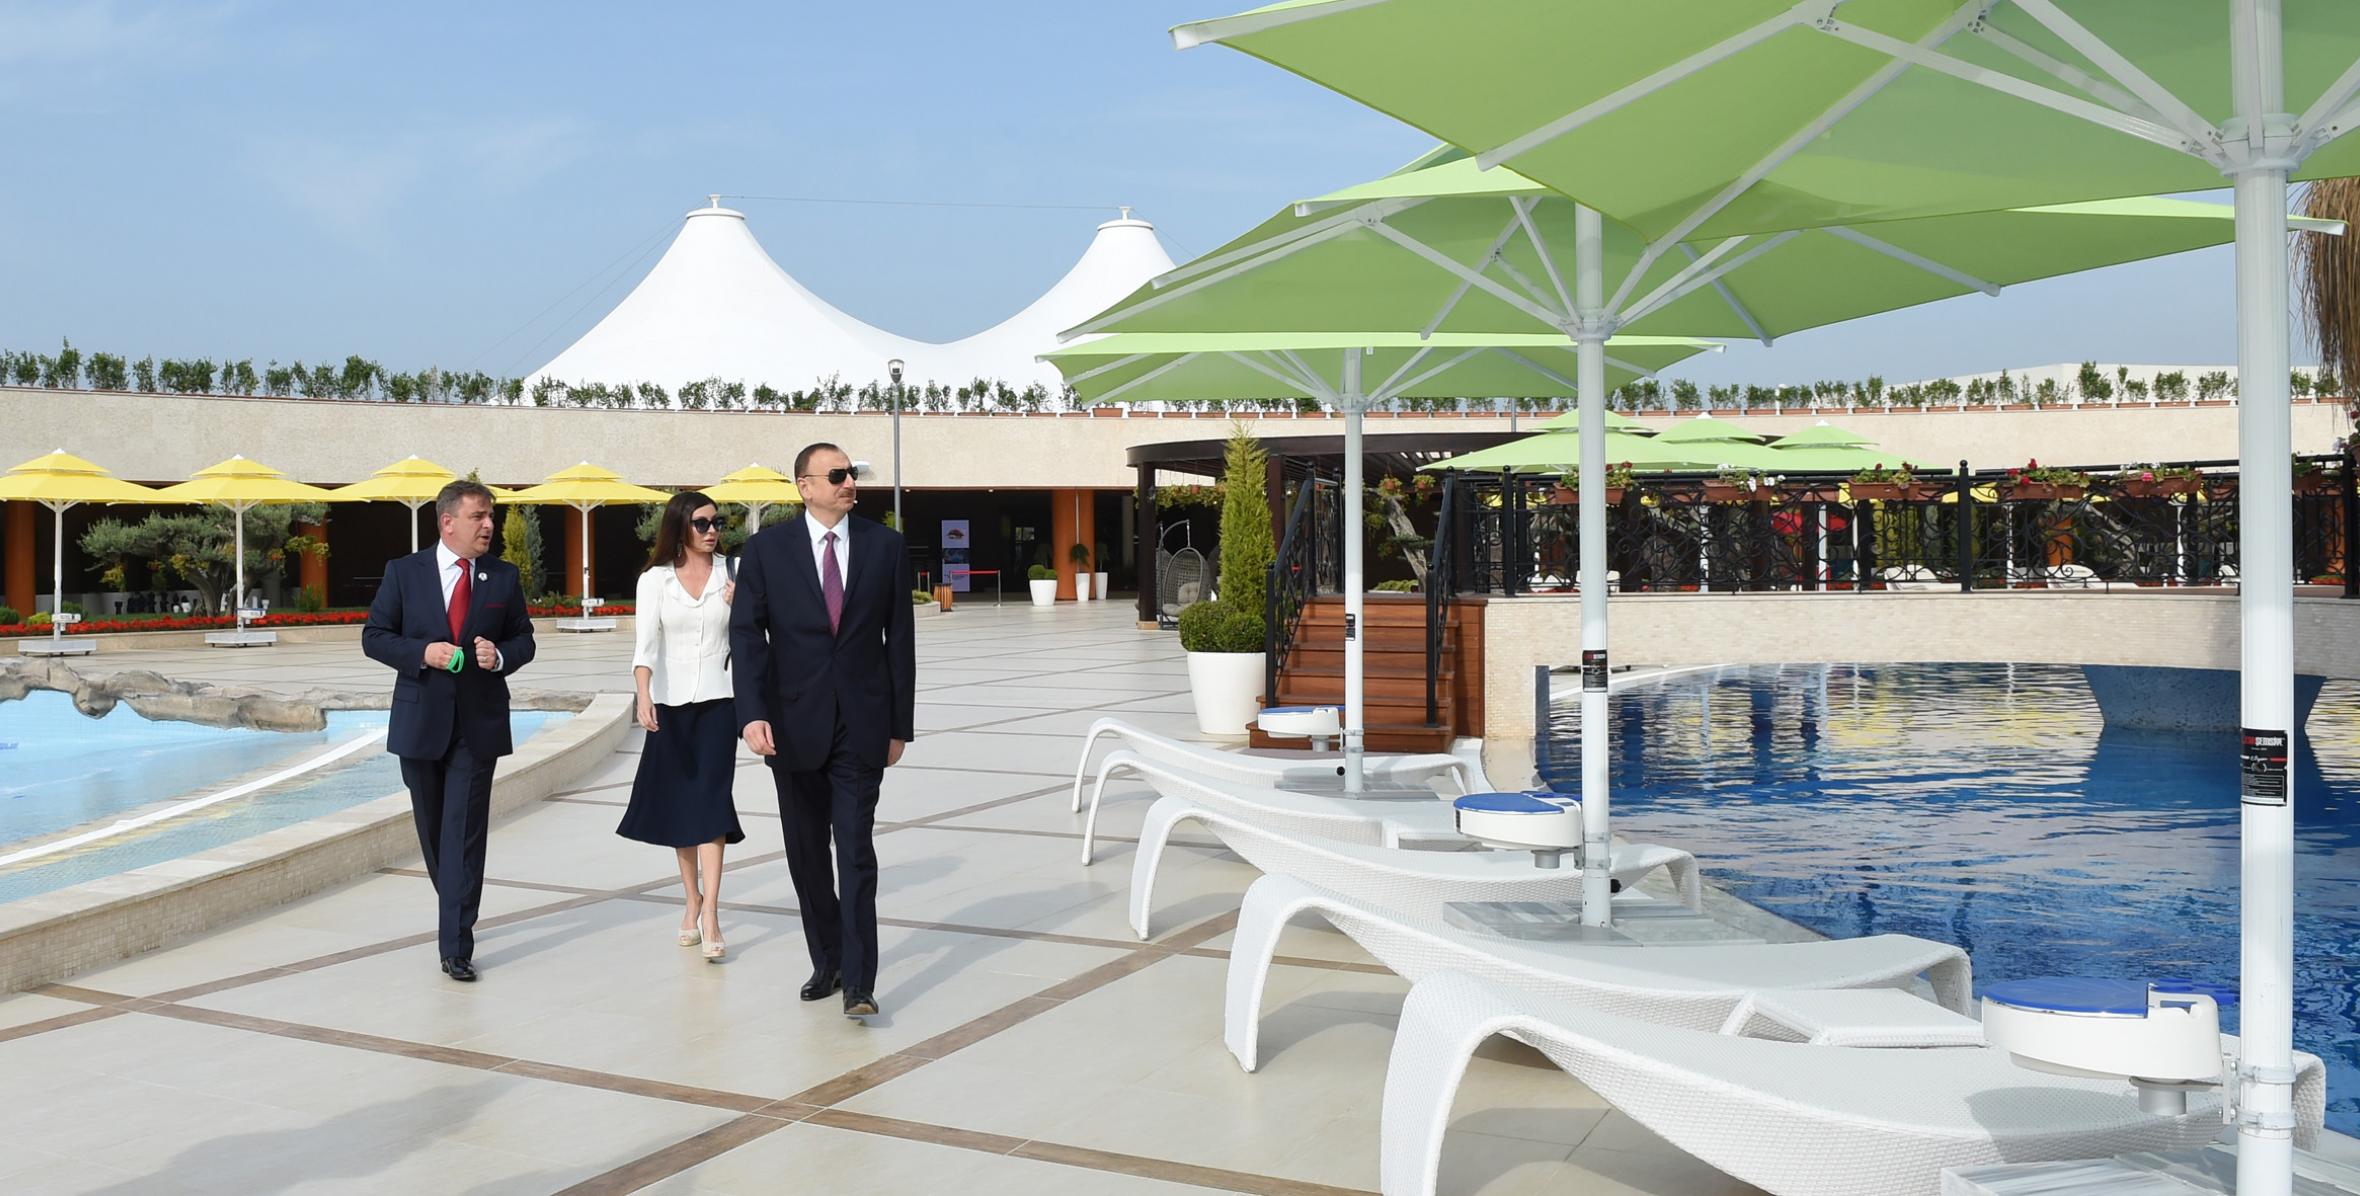 Ilham Aliyev attended the opening of “Dalğa Beach-Aqua Park” recreation and entertainment center